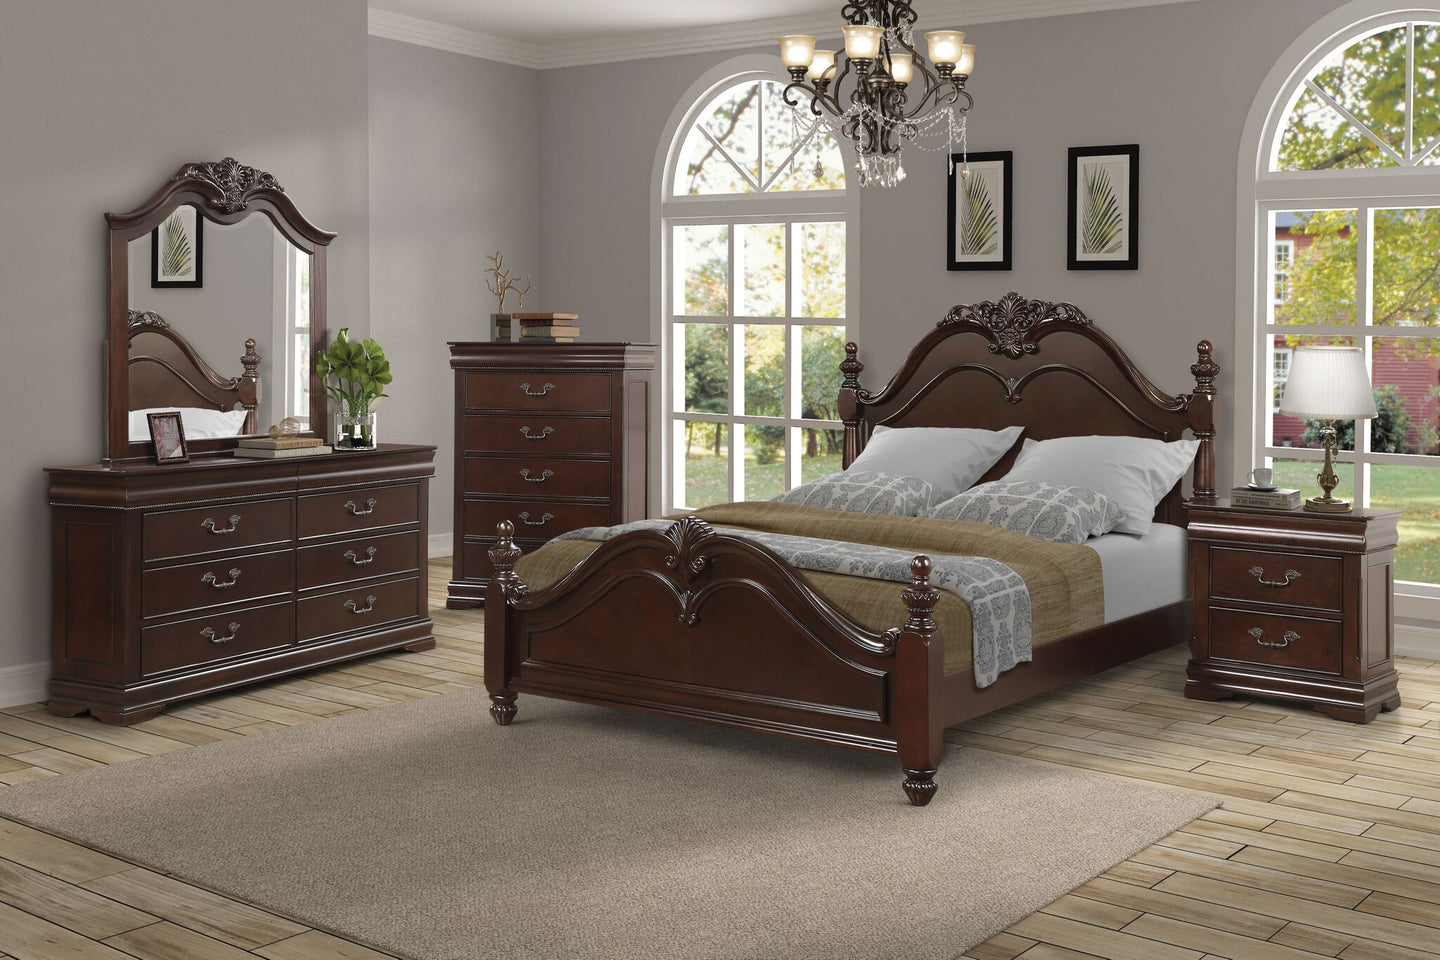 Traditional Style Bedroom In A Dark Cherry Finish